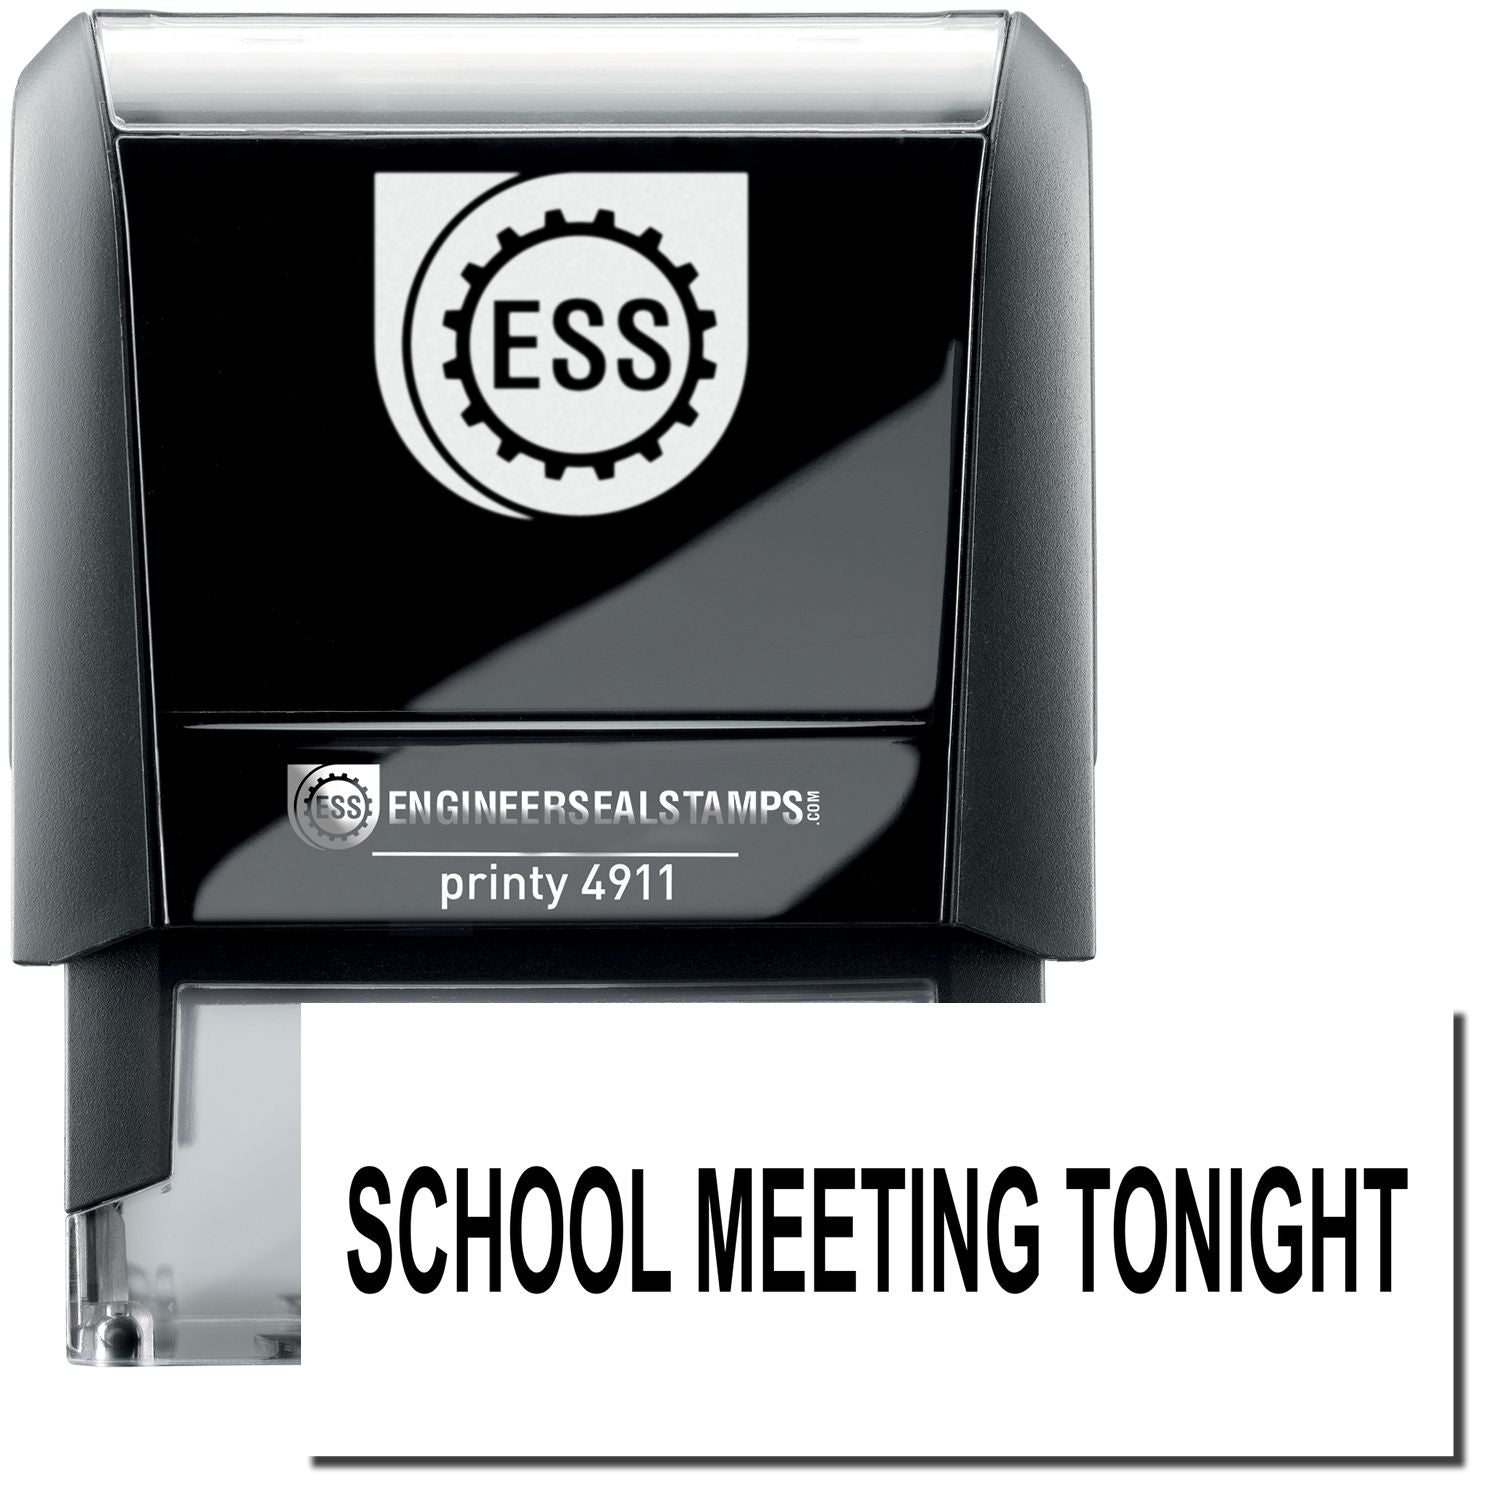 A self-inking stamp with a stamped image showing how the text "SCHOOL MEETING TONIGHT" is displayed after stamping.